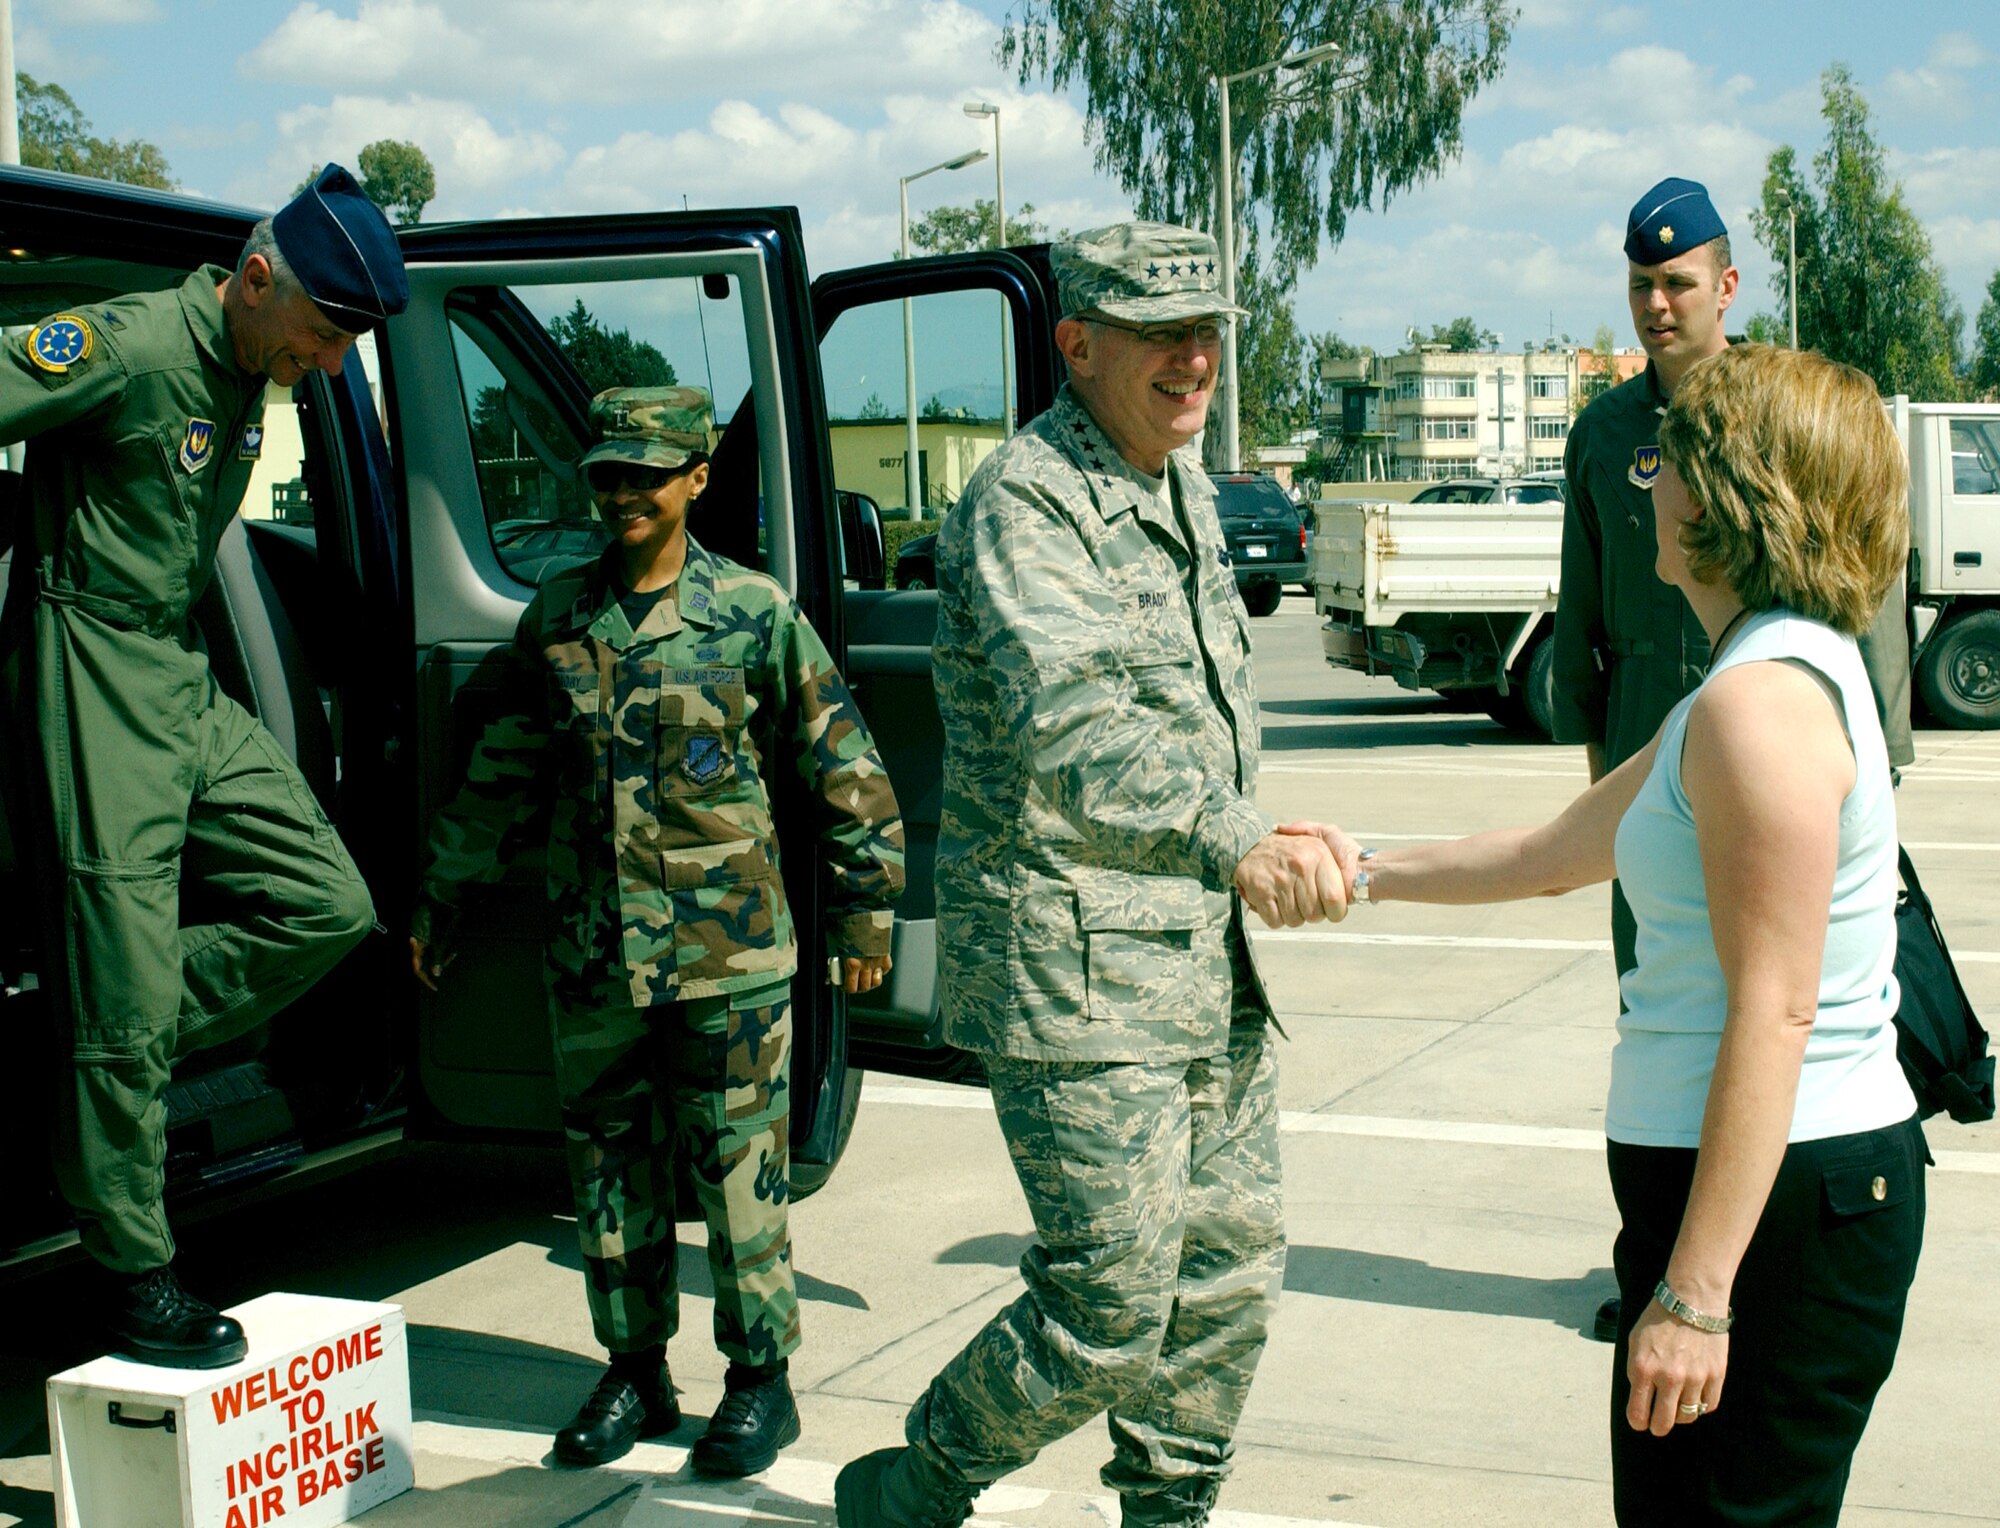 Gen. Roger Brady, United States Air Forces in Europe commander, is greeted by Eloise McDaniel, wife of Col. Phil McDaniel, 39th Air Base Wing commander, upon arrival at the Incirlik Consolidated Club for a spouse and civilian meeting April 28. General Brady visited Incirlik April 28-29. (U.S. Air Force photo by Senior Airman Heather Stanton)